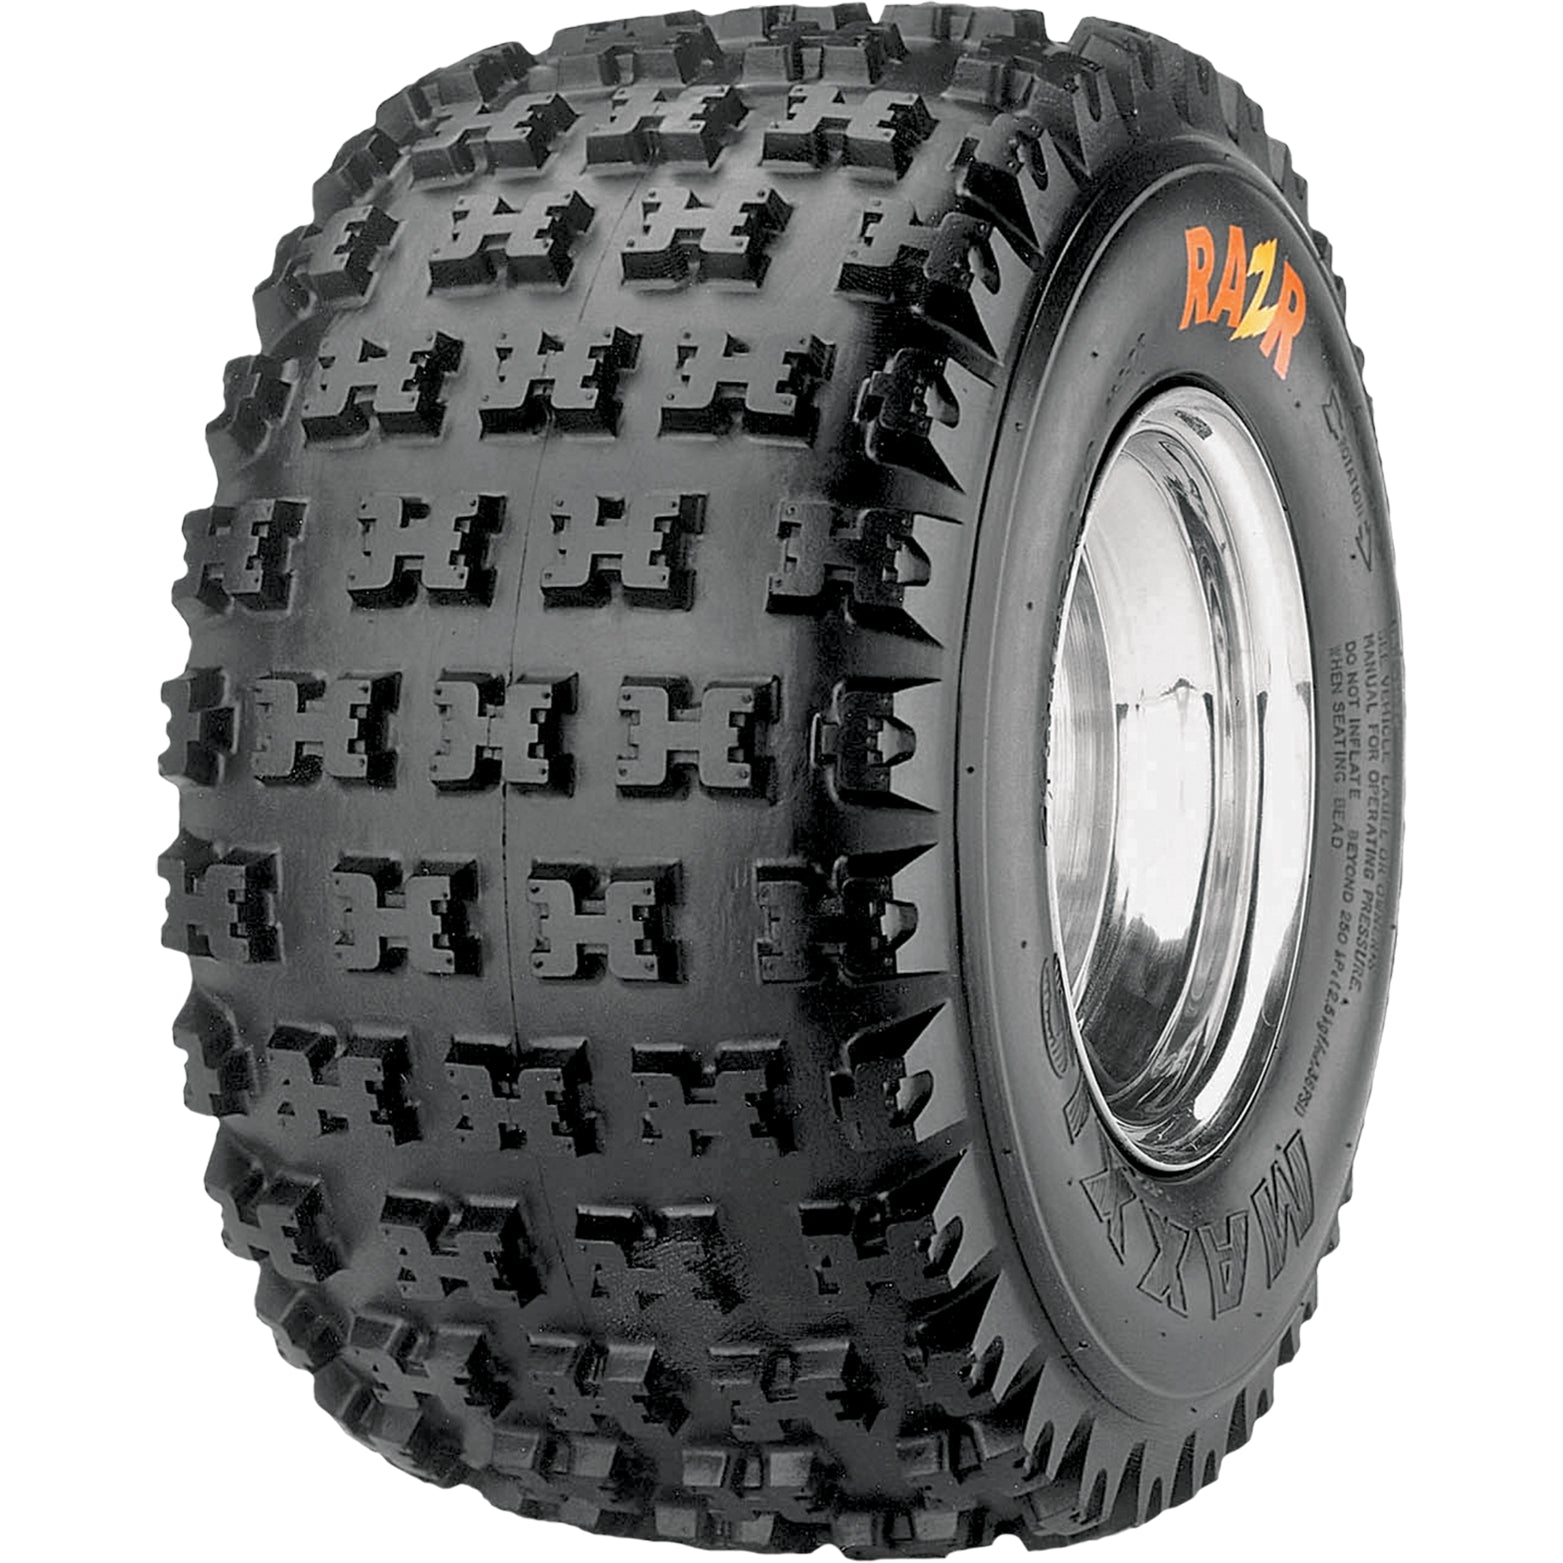 Maxxis TM00483100 Razr ATV Tire 22x11-9 6ply For XC and off-road racing